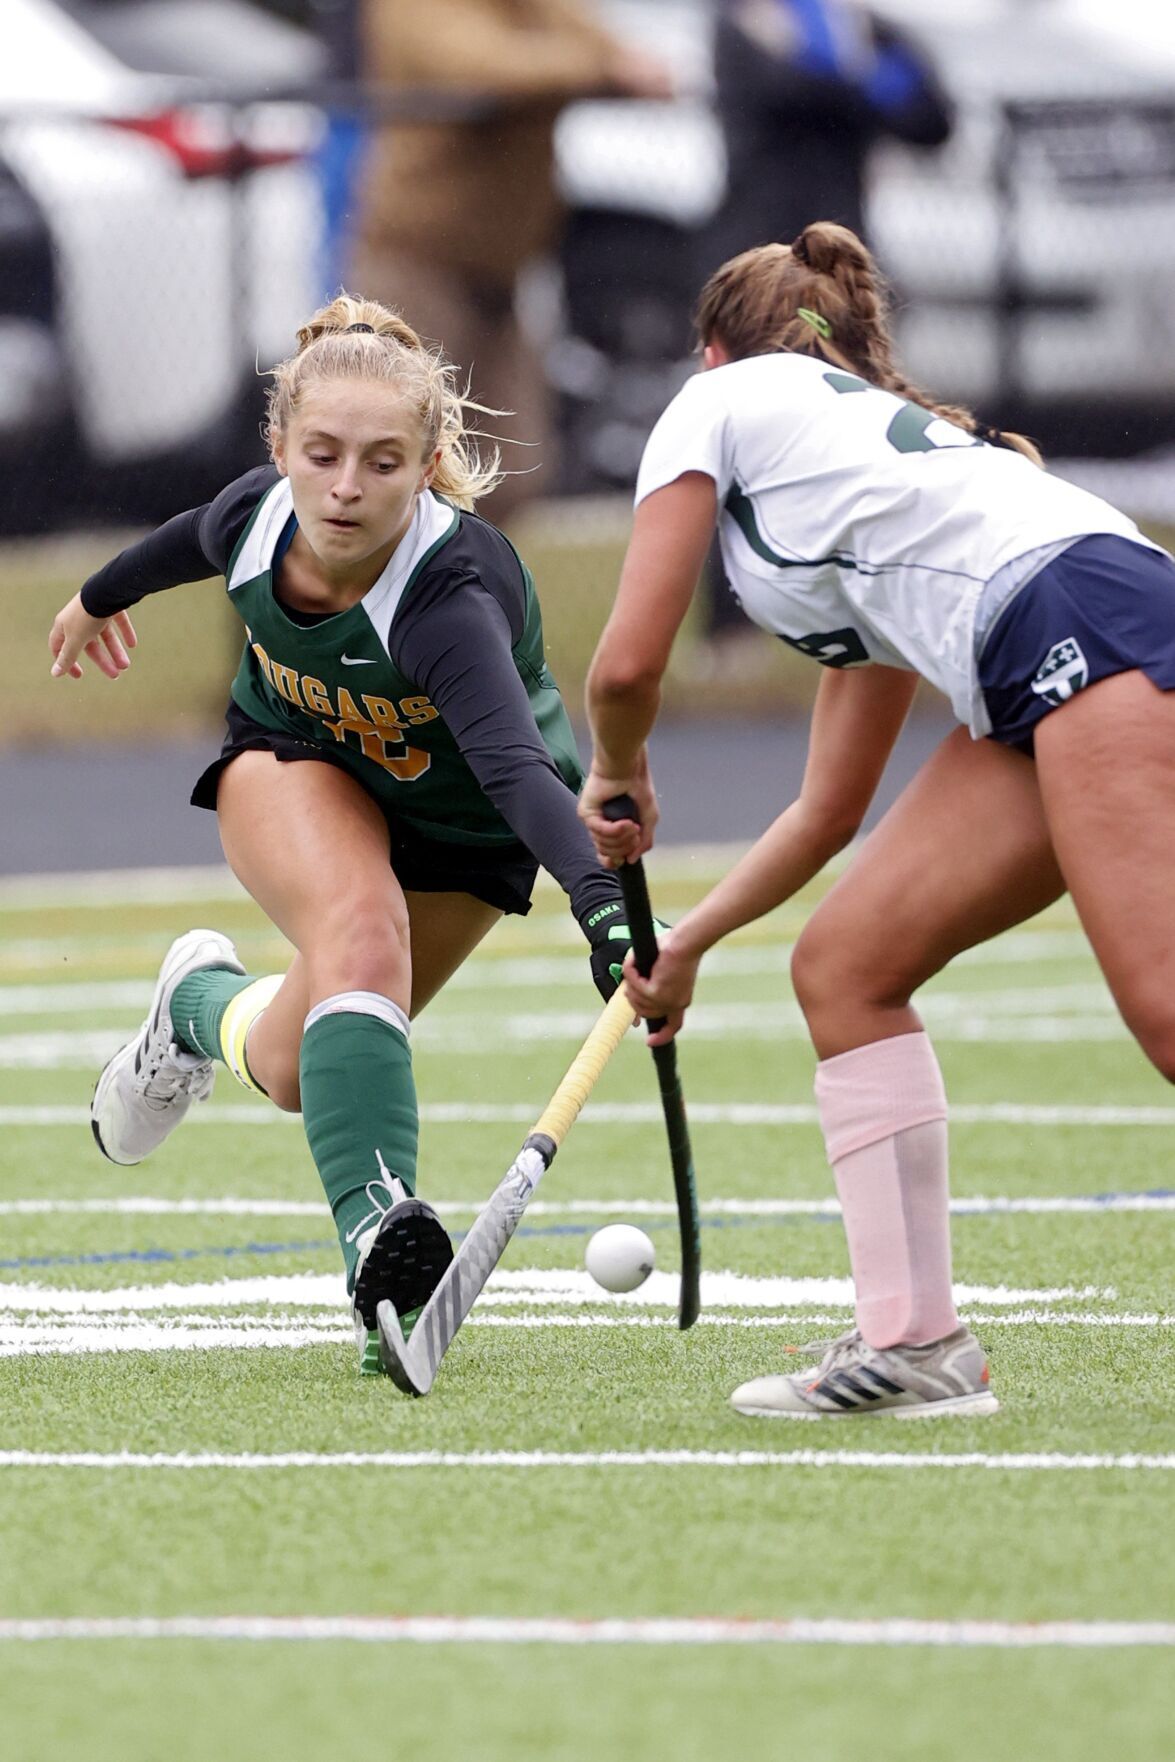 For local field hockey players, time on the ice benefits time on